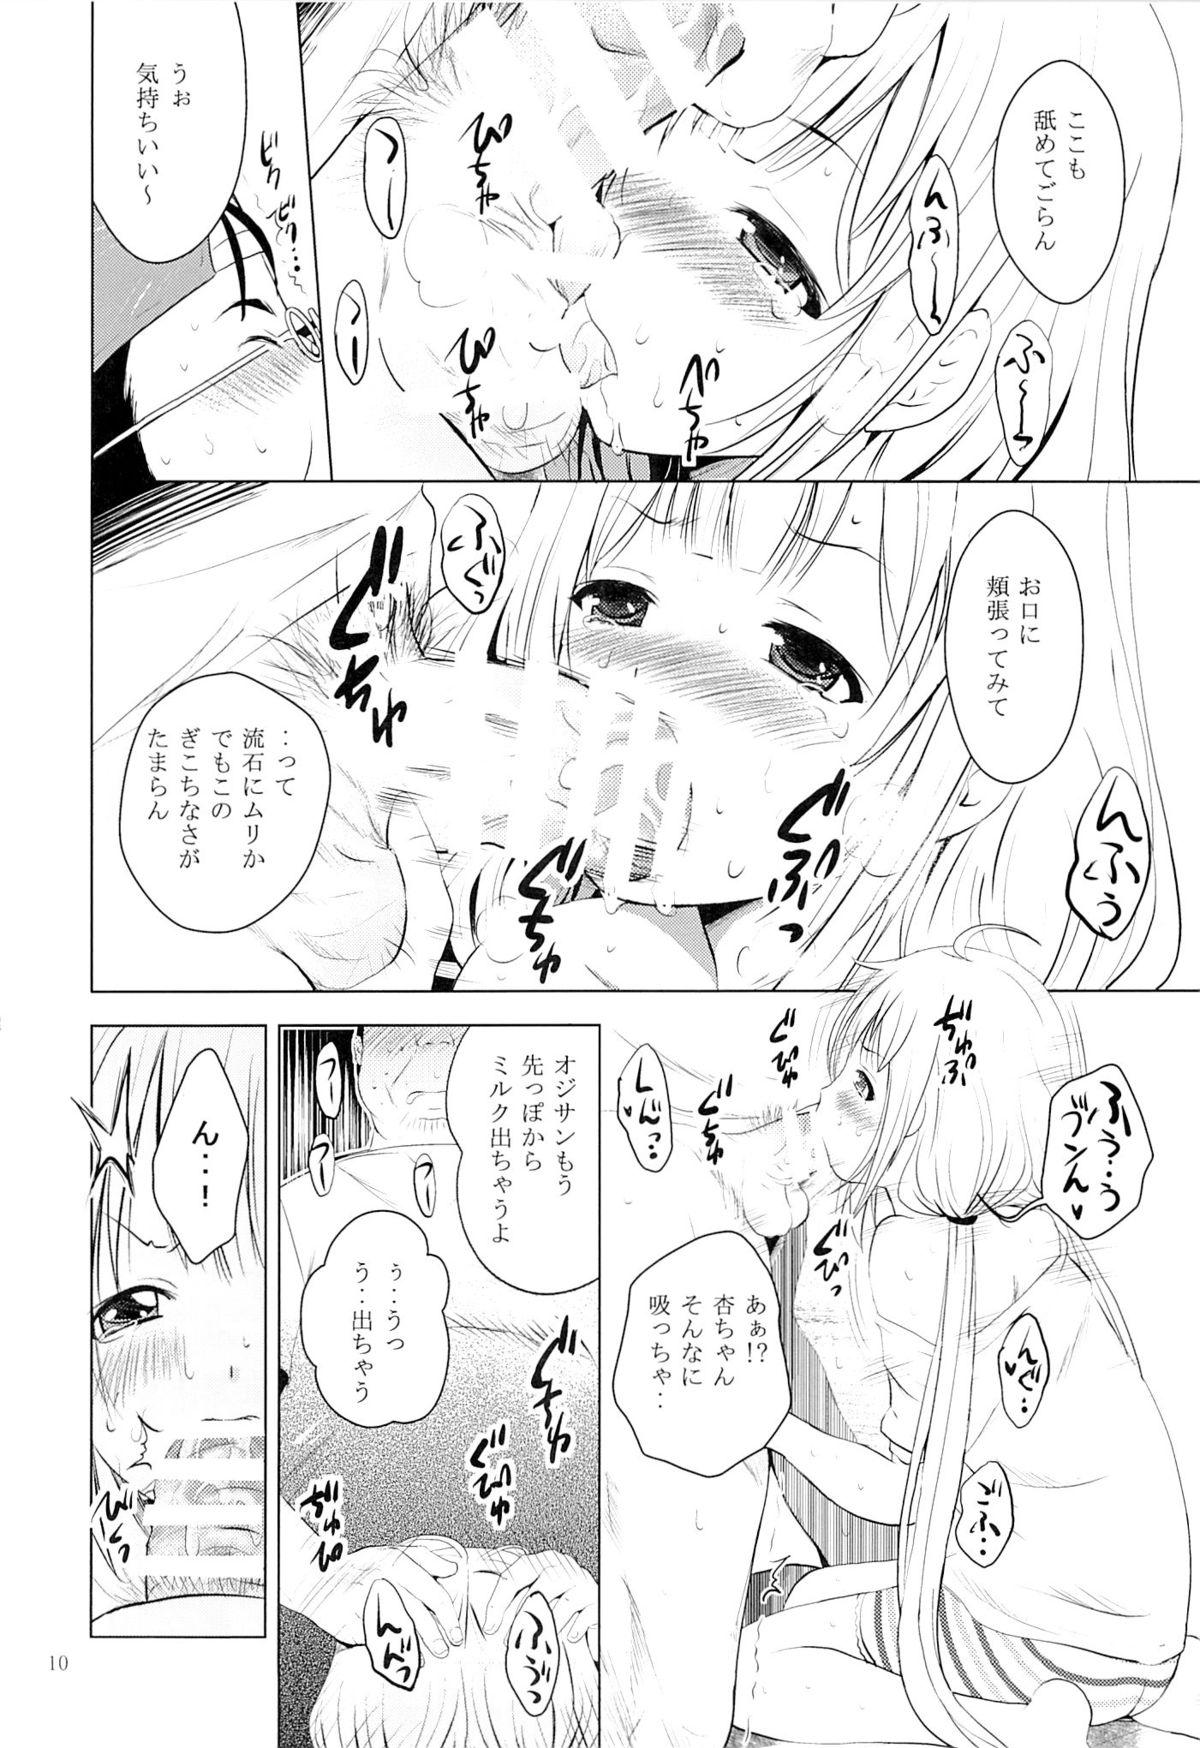 Hard Cock MOUSOU Mini Theater 37 - The idolmaster Casting - Page 9